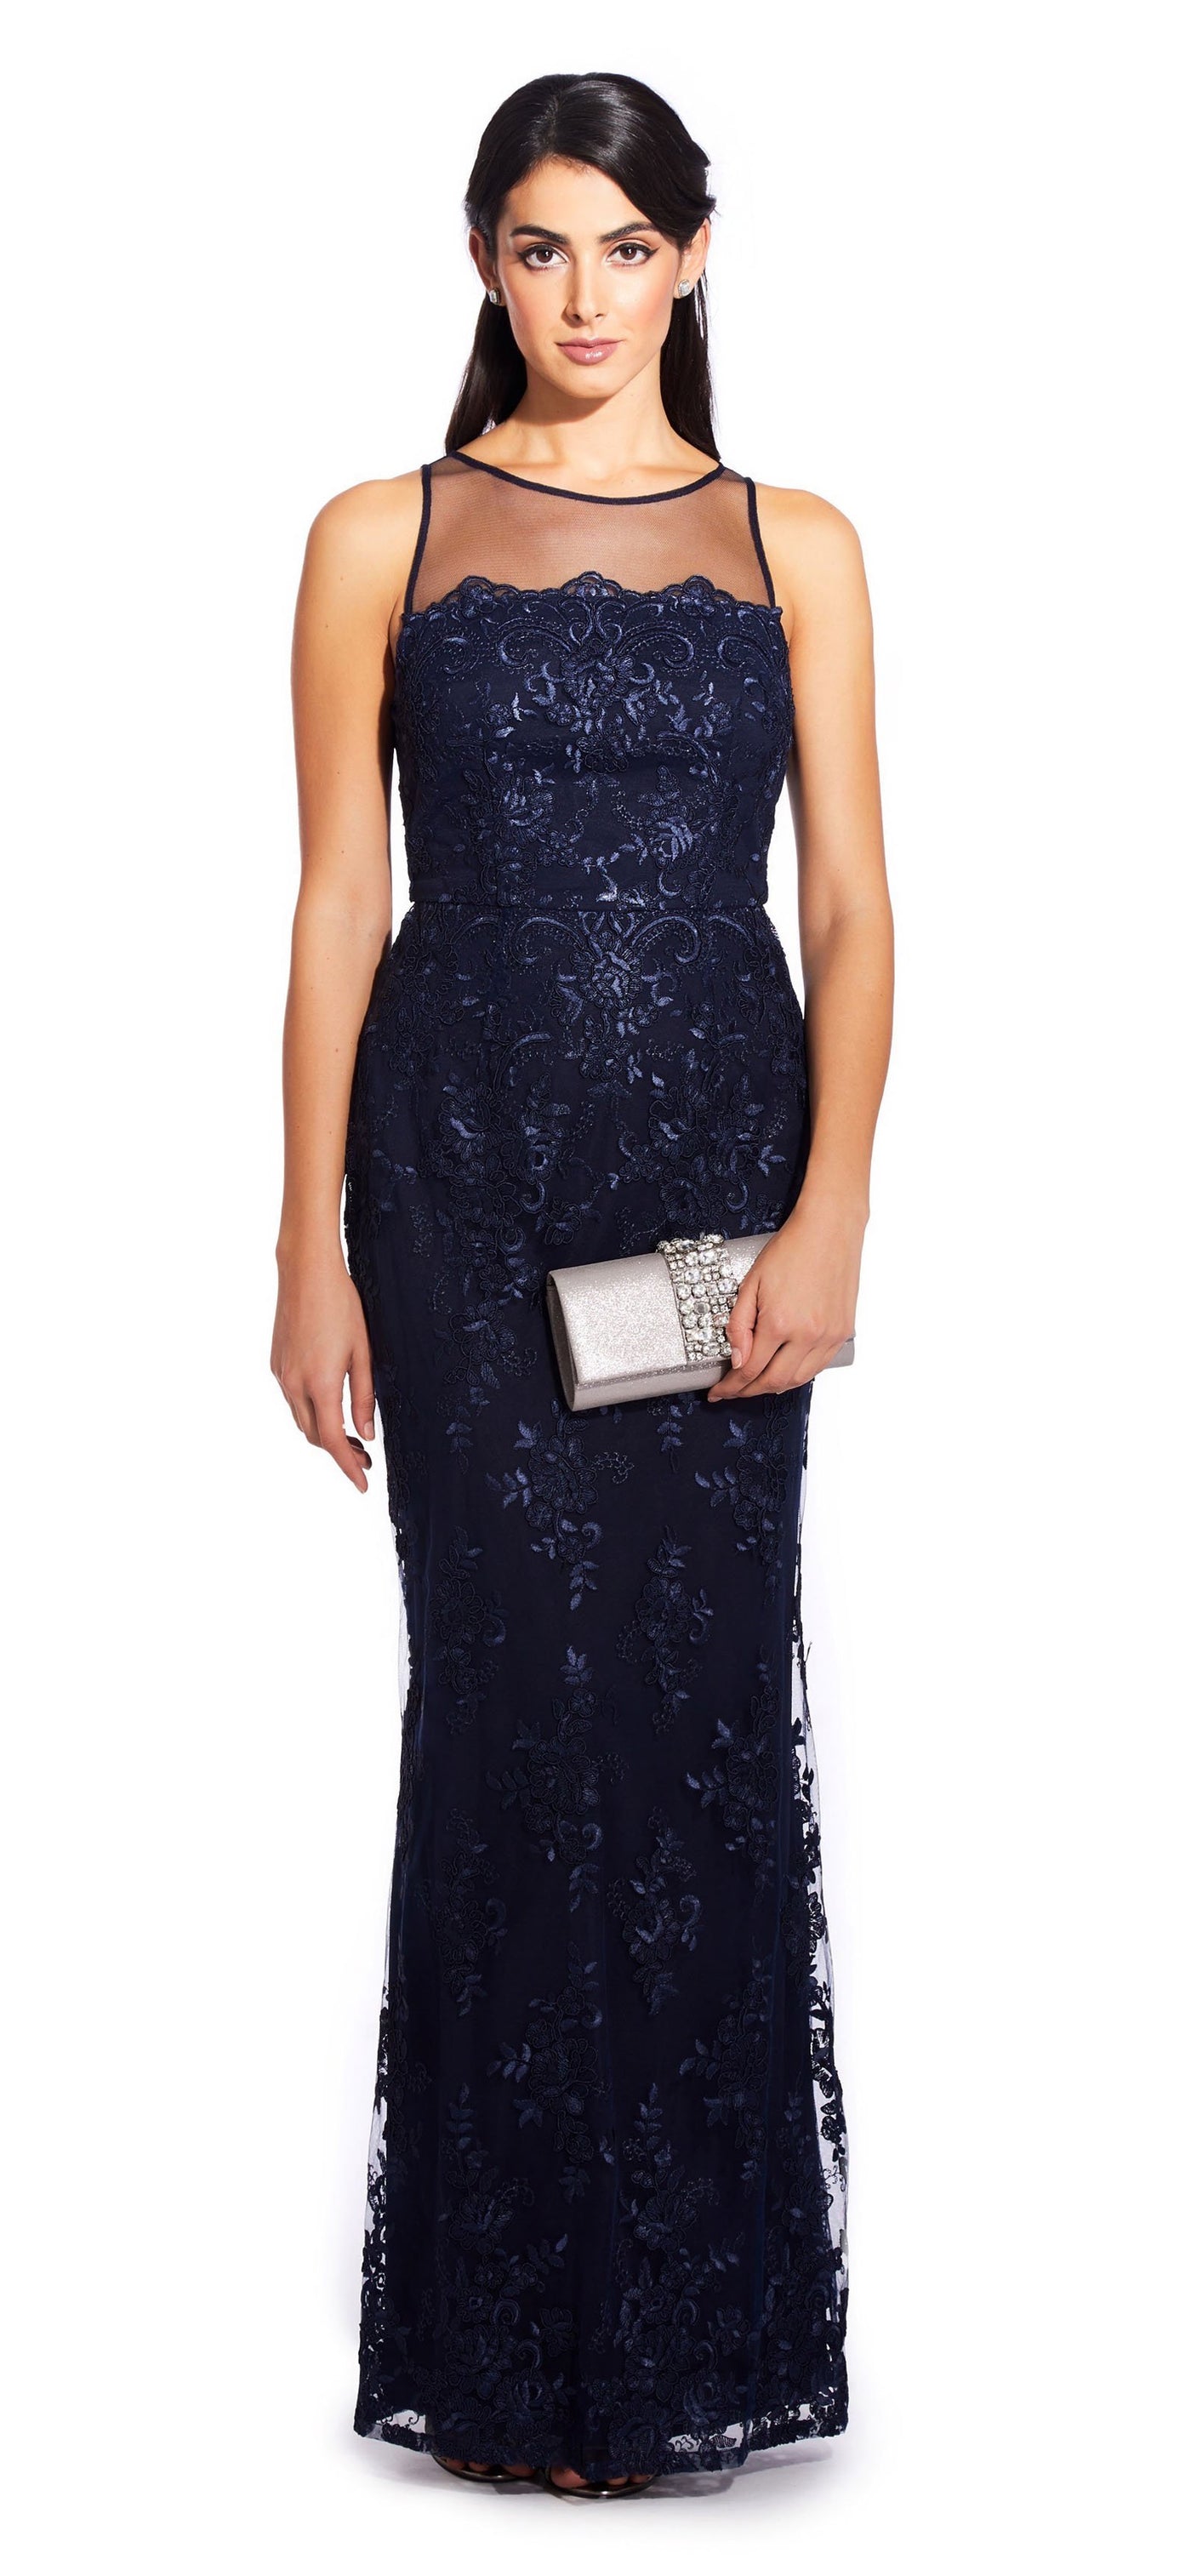 Adrianna Papell - AP1E204699 Embroidered Illusion Sheath Dress In Blue